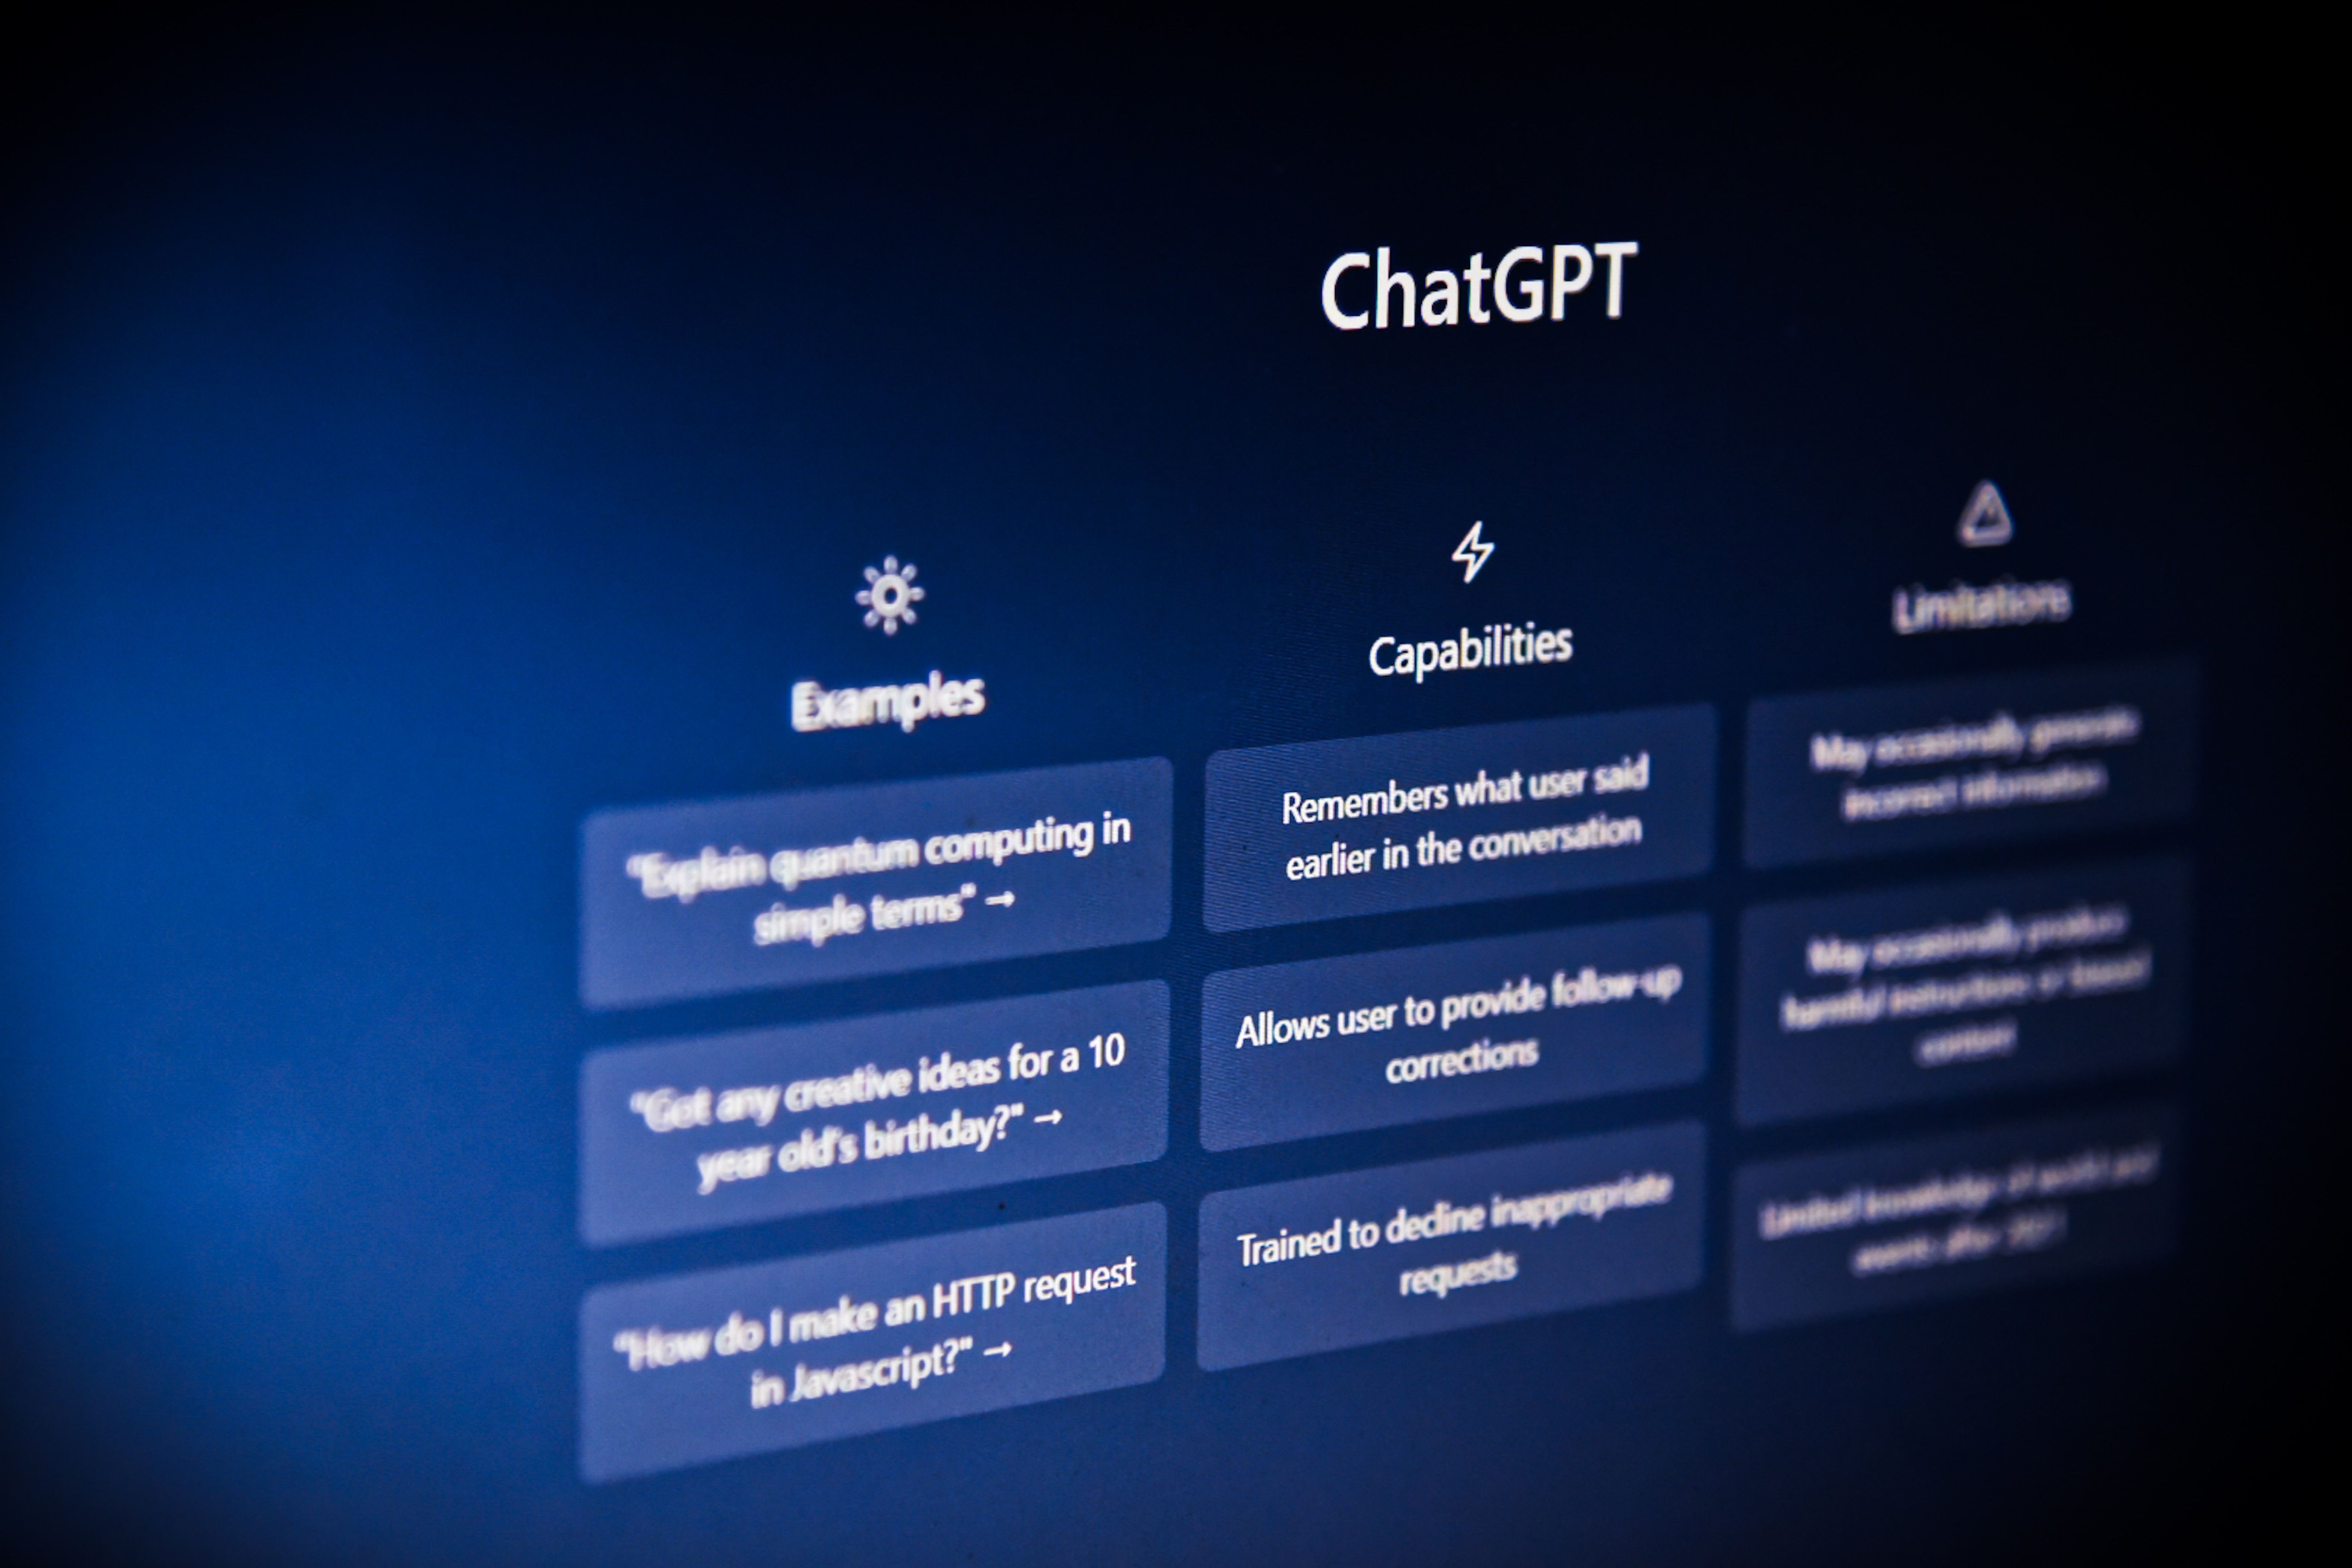 An angled photo of a screen showing ChatGPT's prompt and capabilities.